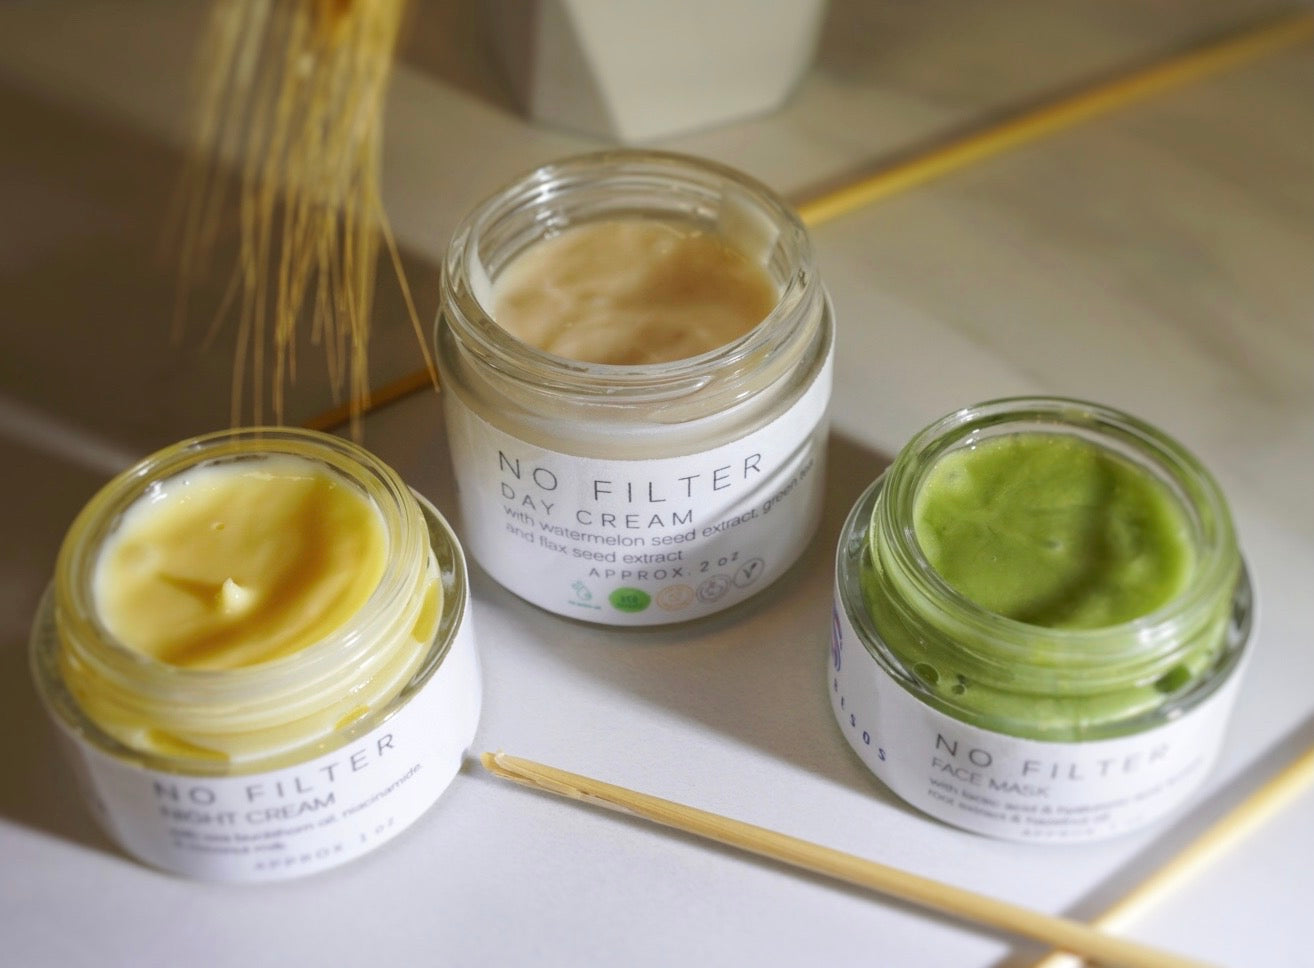 No Filter skincare set is made with clean ingredients that help minimize pores & reduce excess oils 